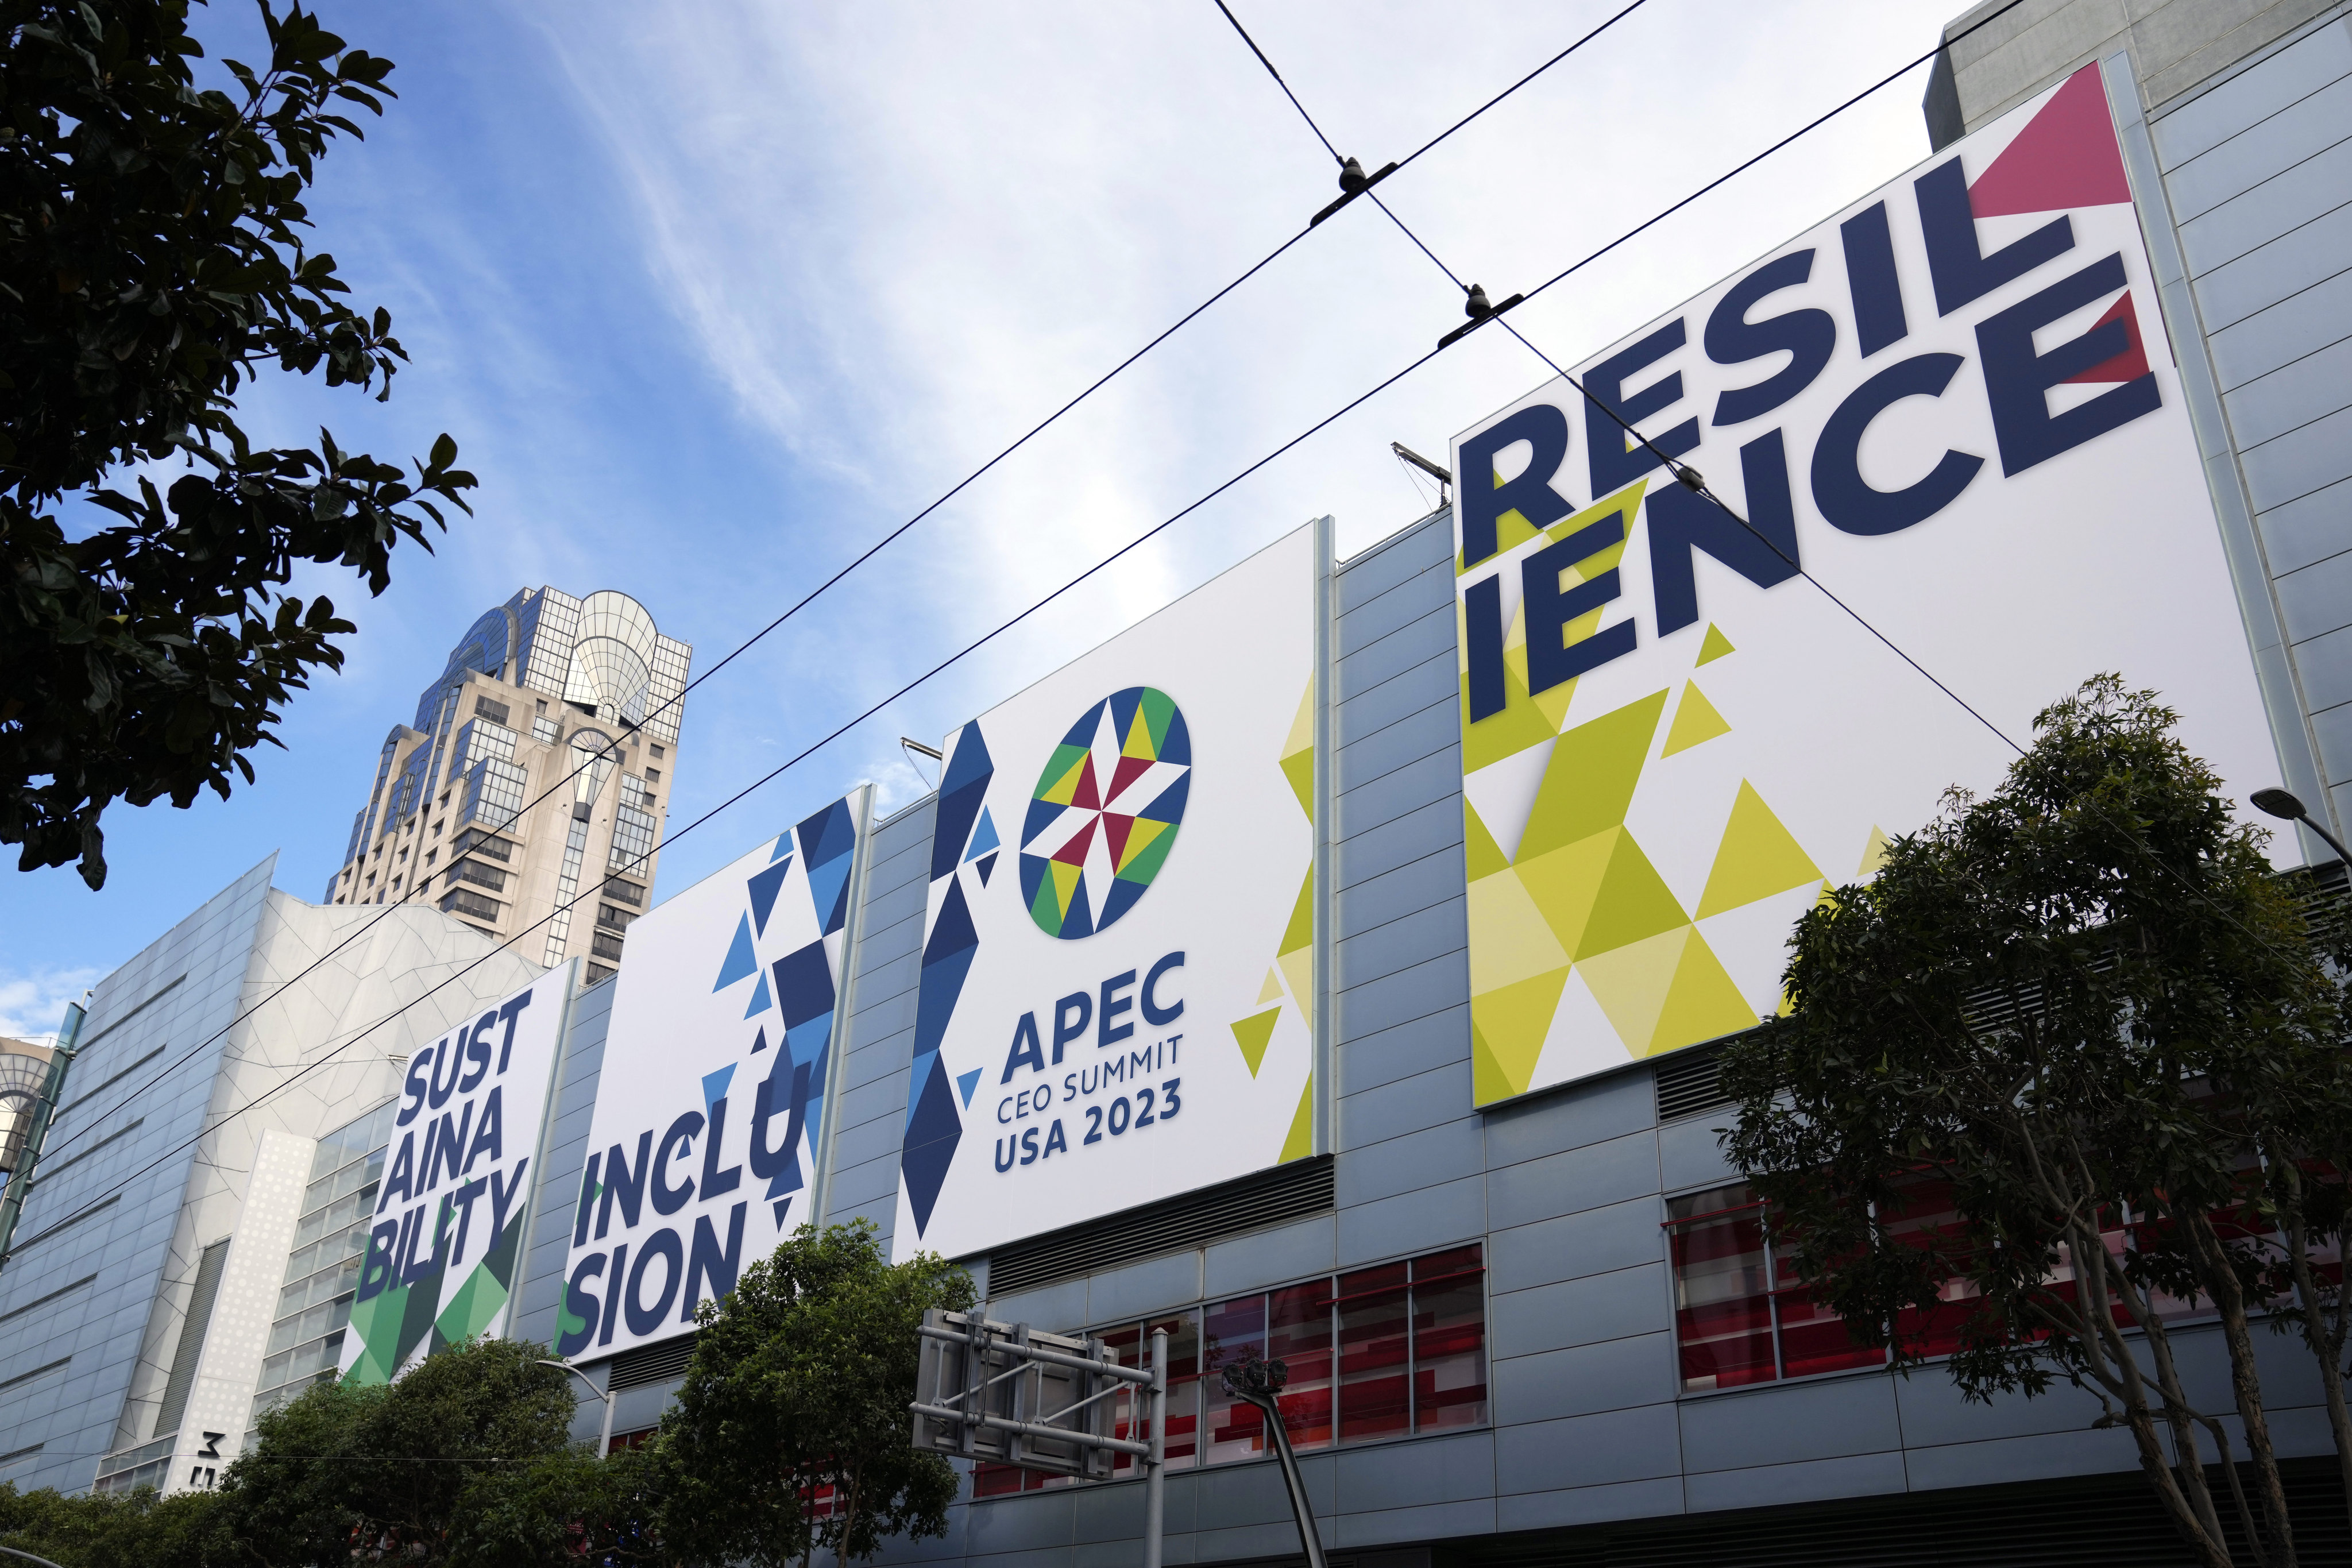 Signs welcome visitors to the Apec summit in San Francisco on Monday, where AI will figure prominently on the agenda. Photo: AP